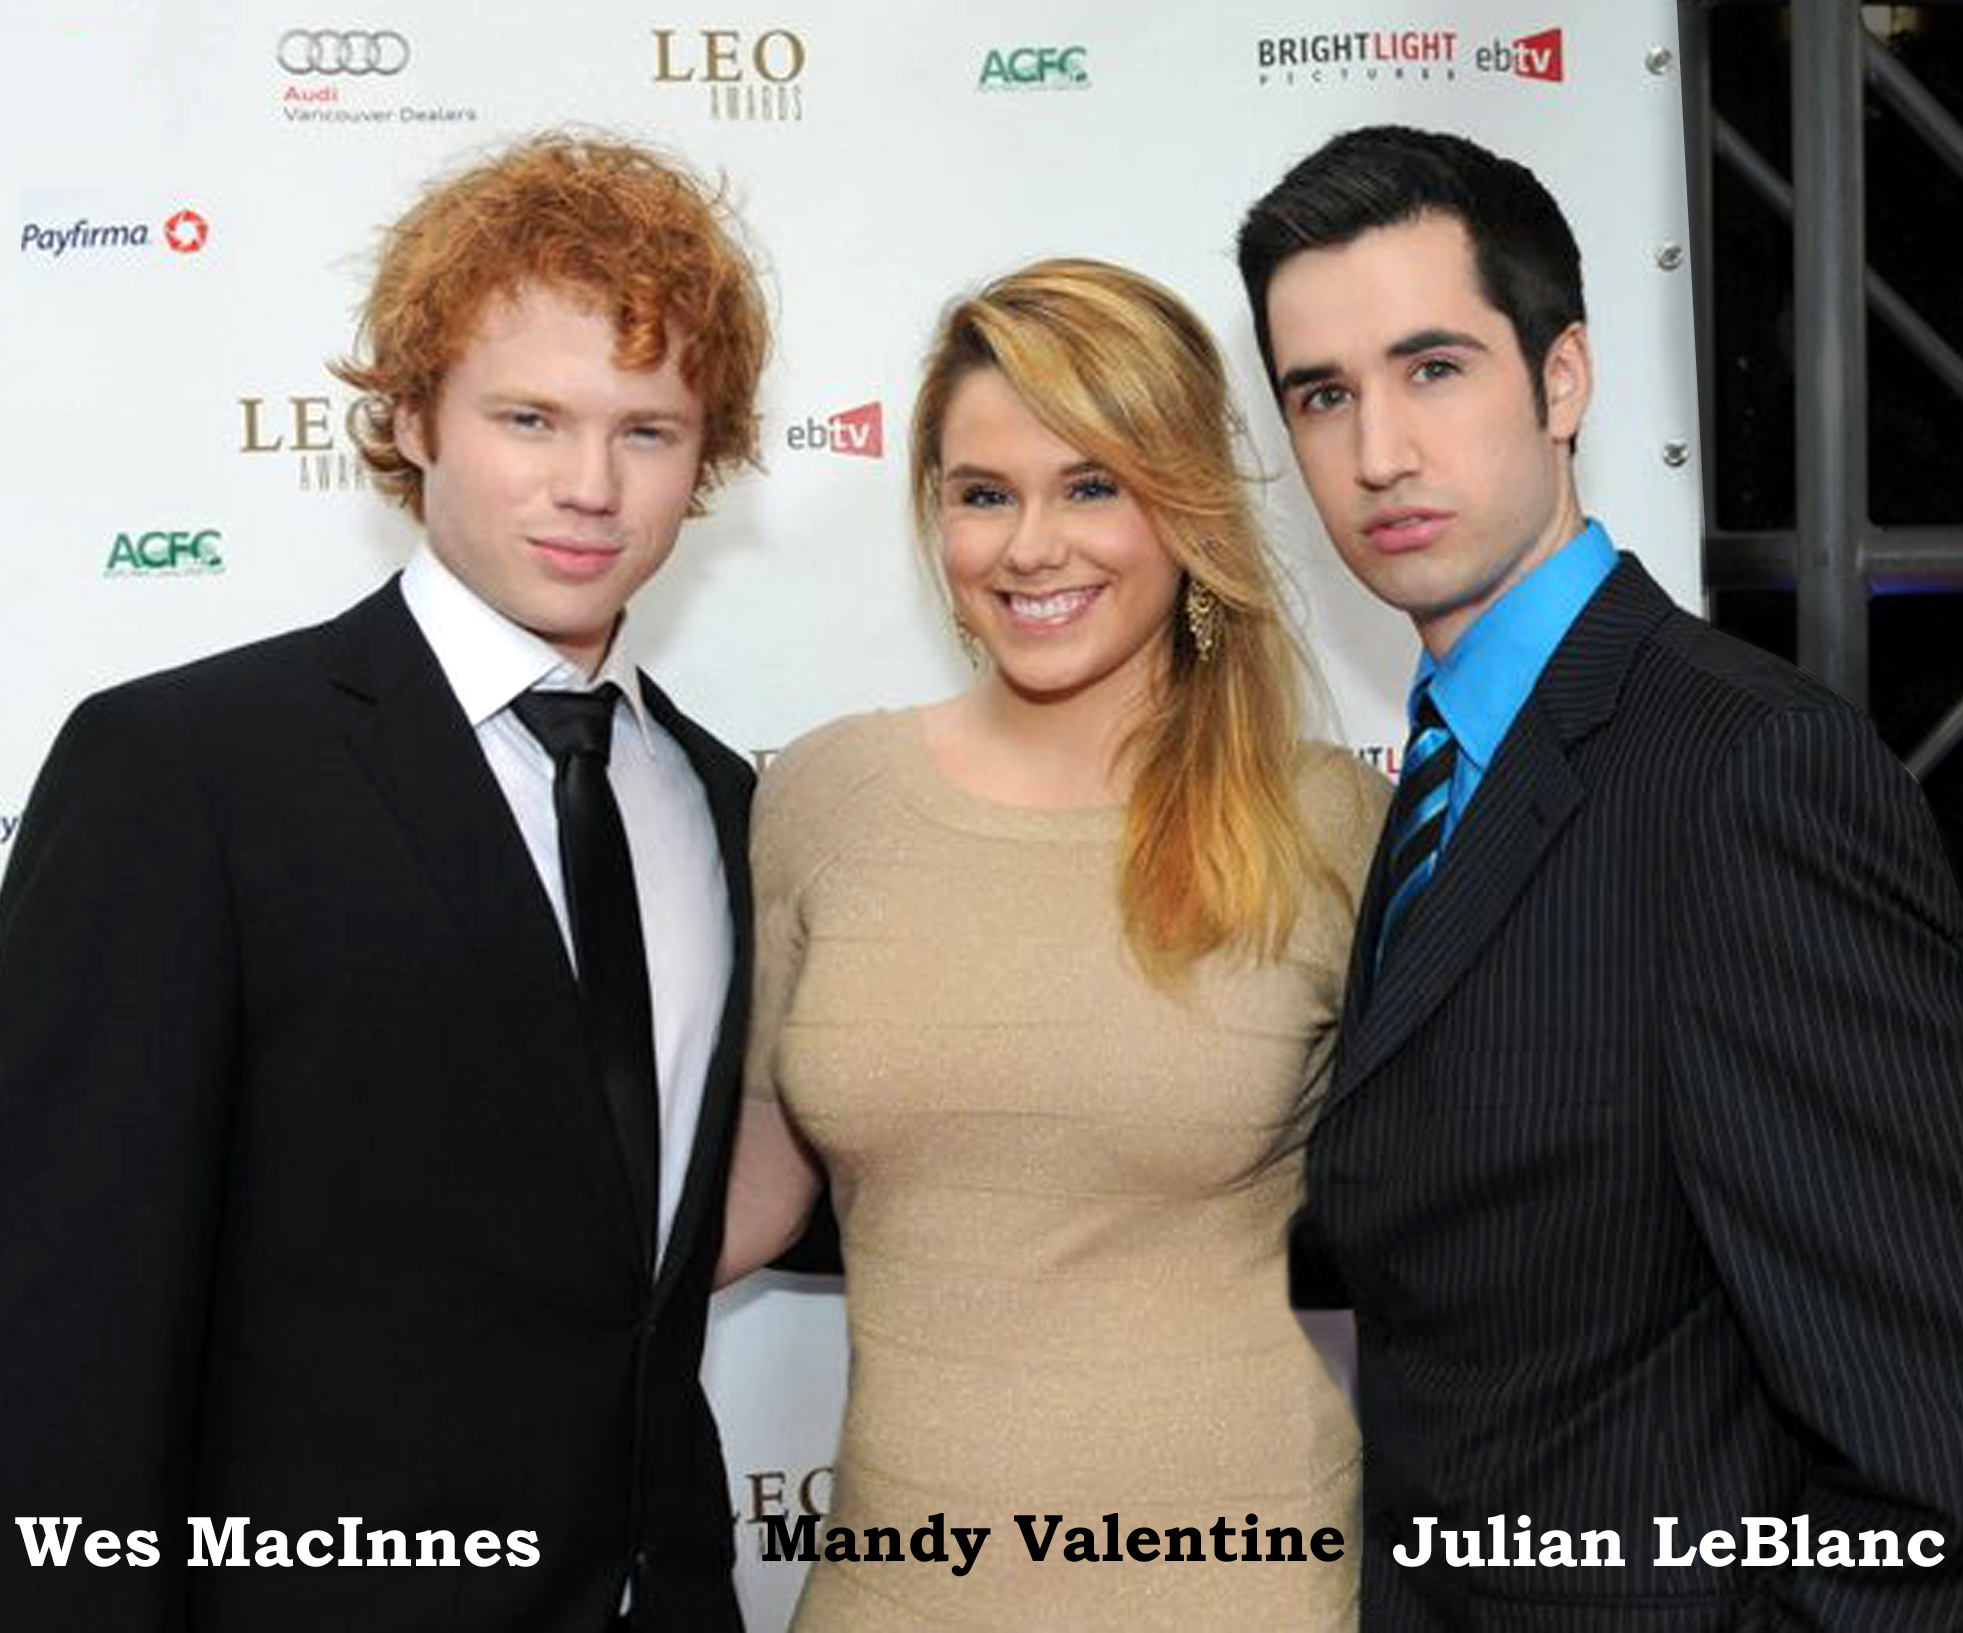 Julian LeBlanc with two other actors at the 2011 Leo Awards.